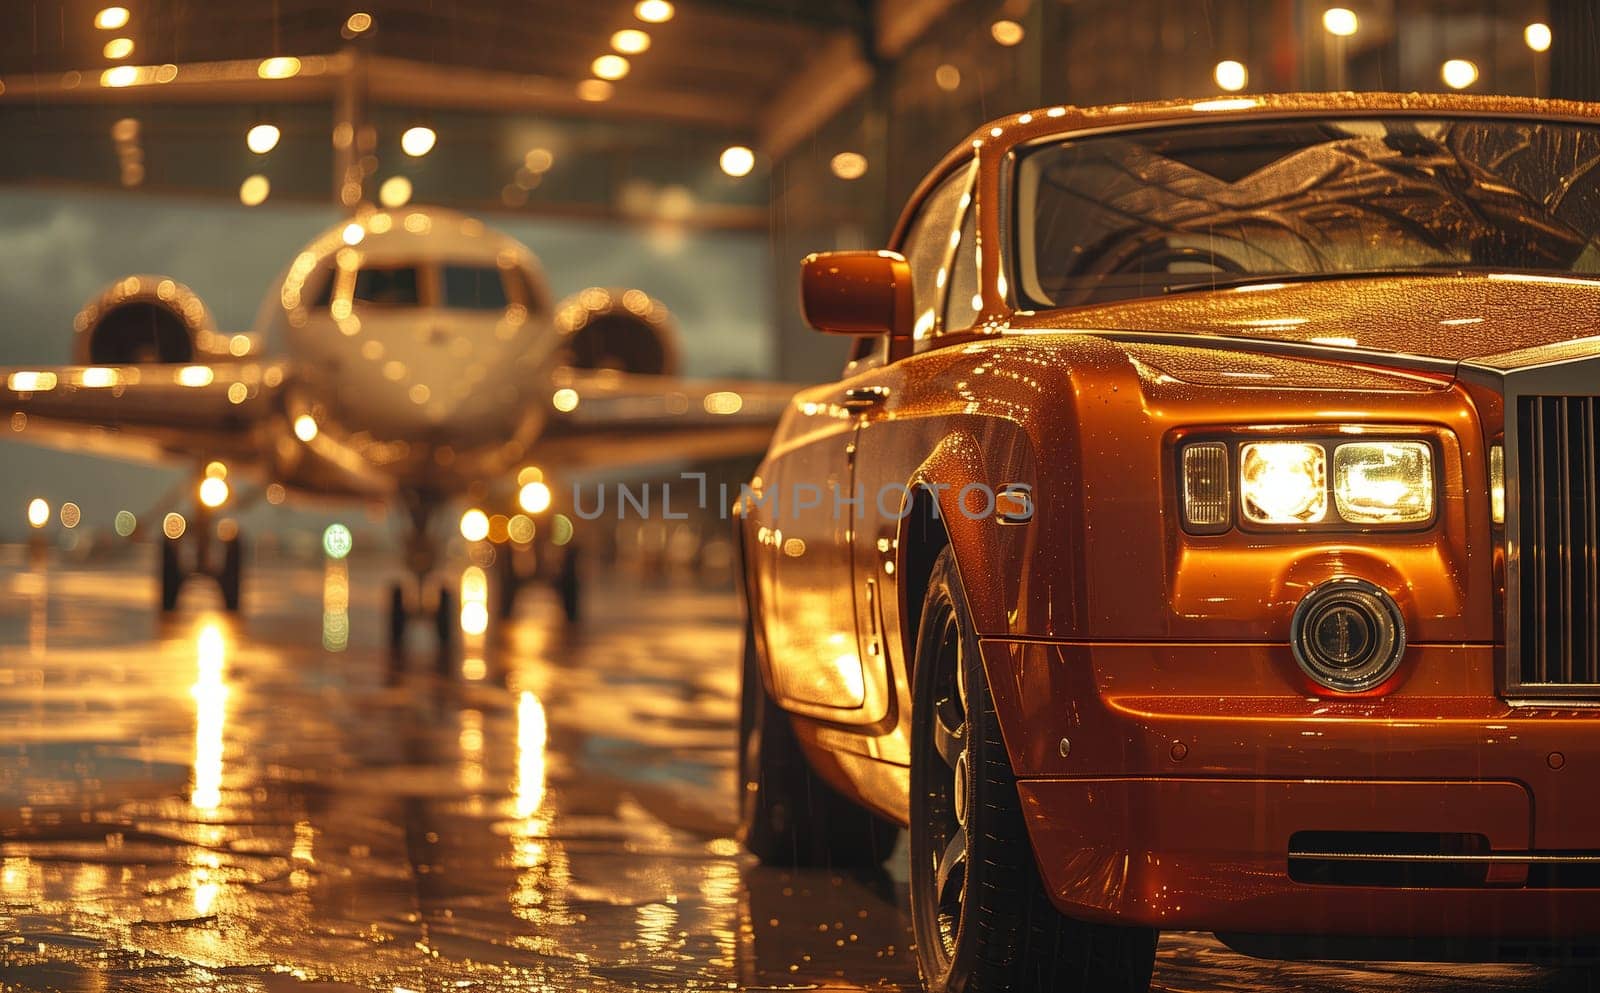 A car is parked in front of a private jet, displaying its Automotive lighting and sleek design next to the towering aircraft